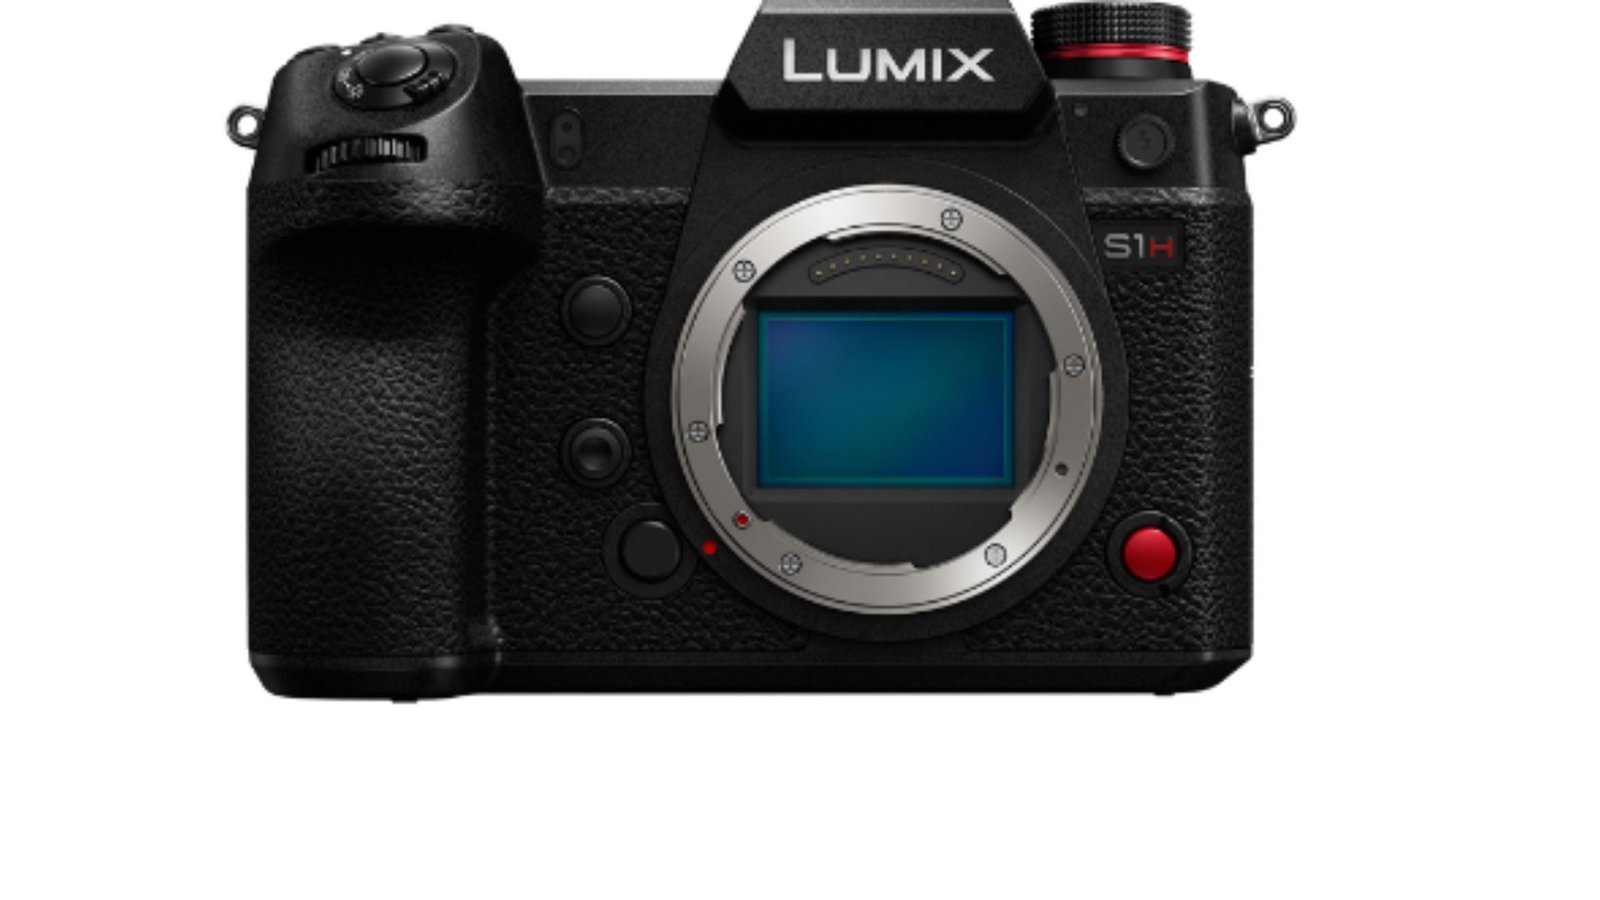 Rent Panasonic Lumix S1H Camera with Cp.3 Lens Kit in Delhi NCR, Rent Camera, Camera accessories, Camera lenses for rent, in Delhi Gurgaon Noida, hire Shooting equipment, Lighting equipment rental, Film gear rental for Video production, camera rental company in Delhi, film equipment rental company